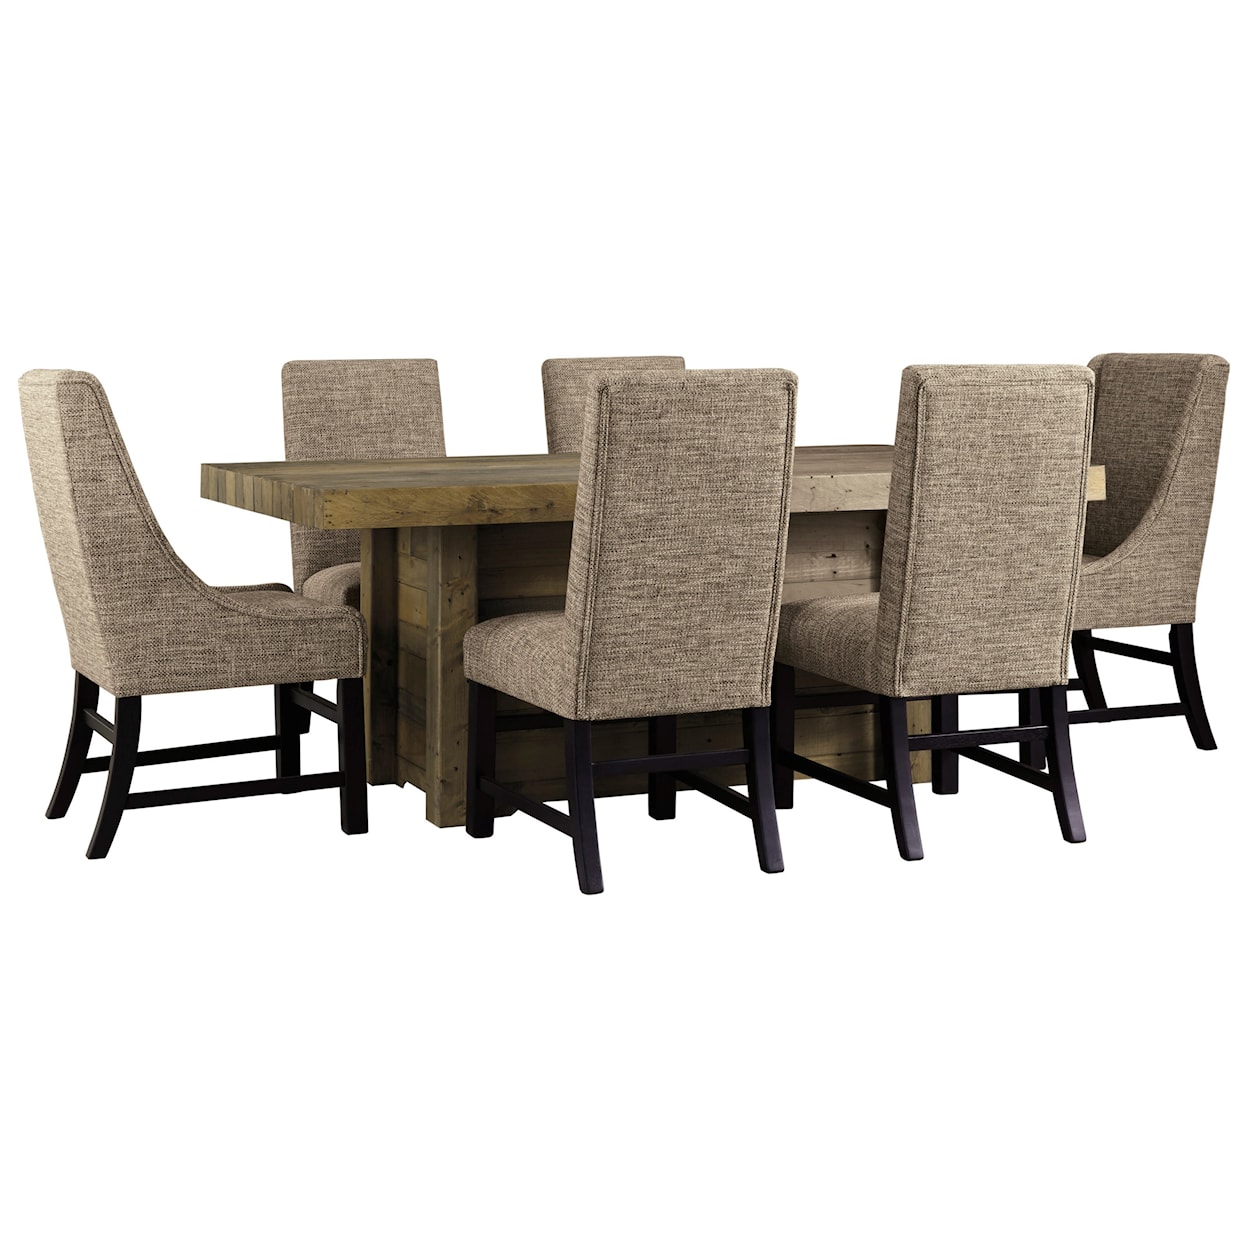 Signature Design by Ashley Sommerford 7-Piece Rectangular Dining Room Table Set